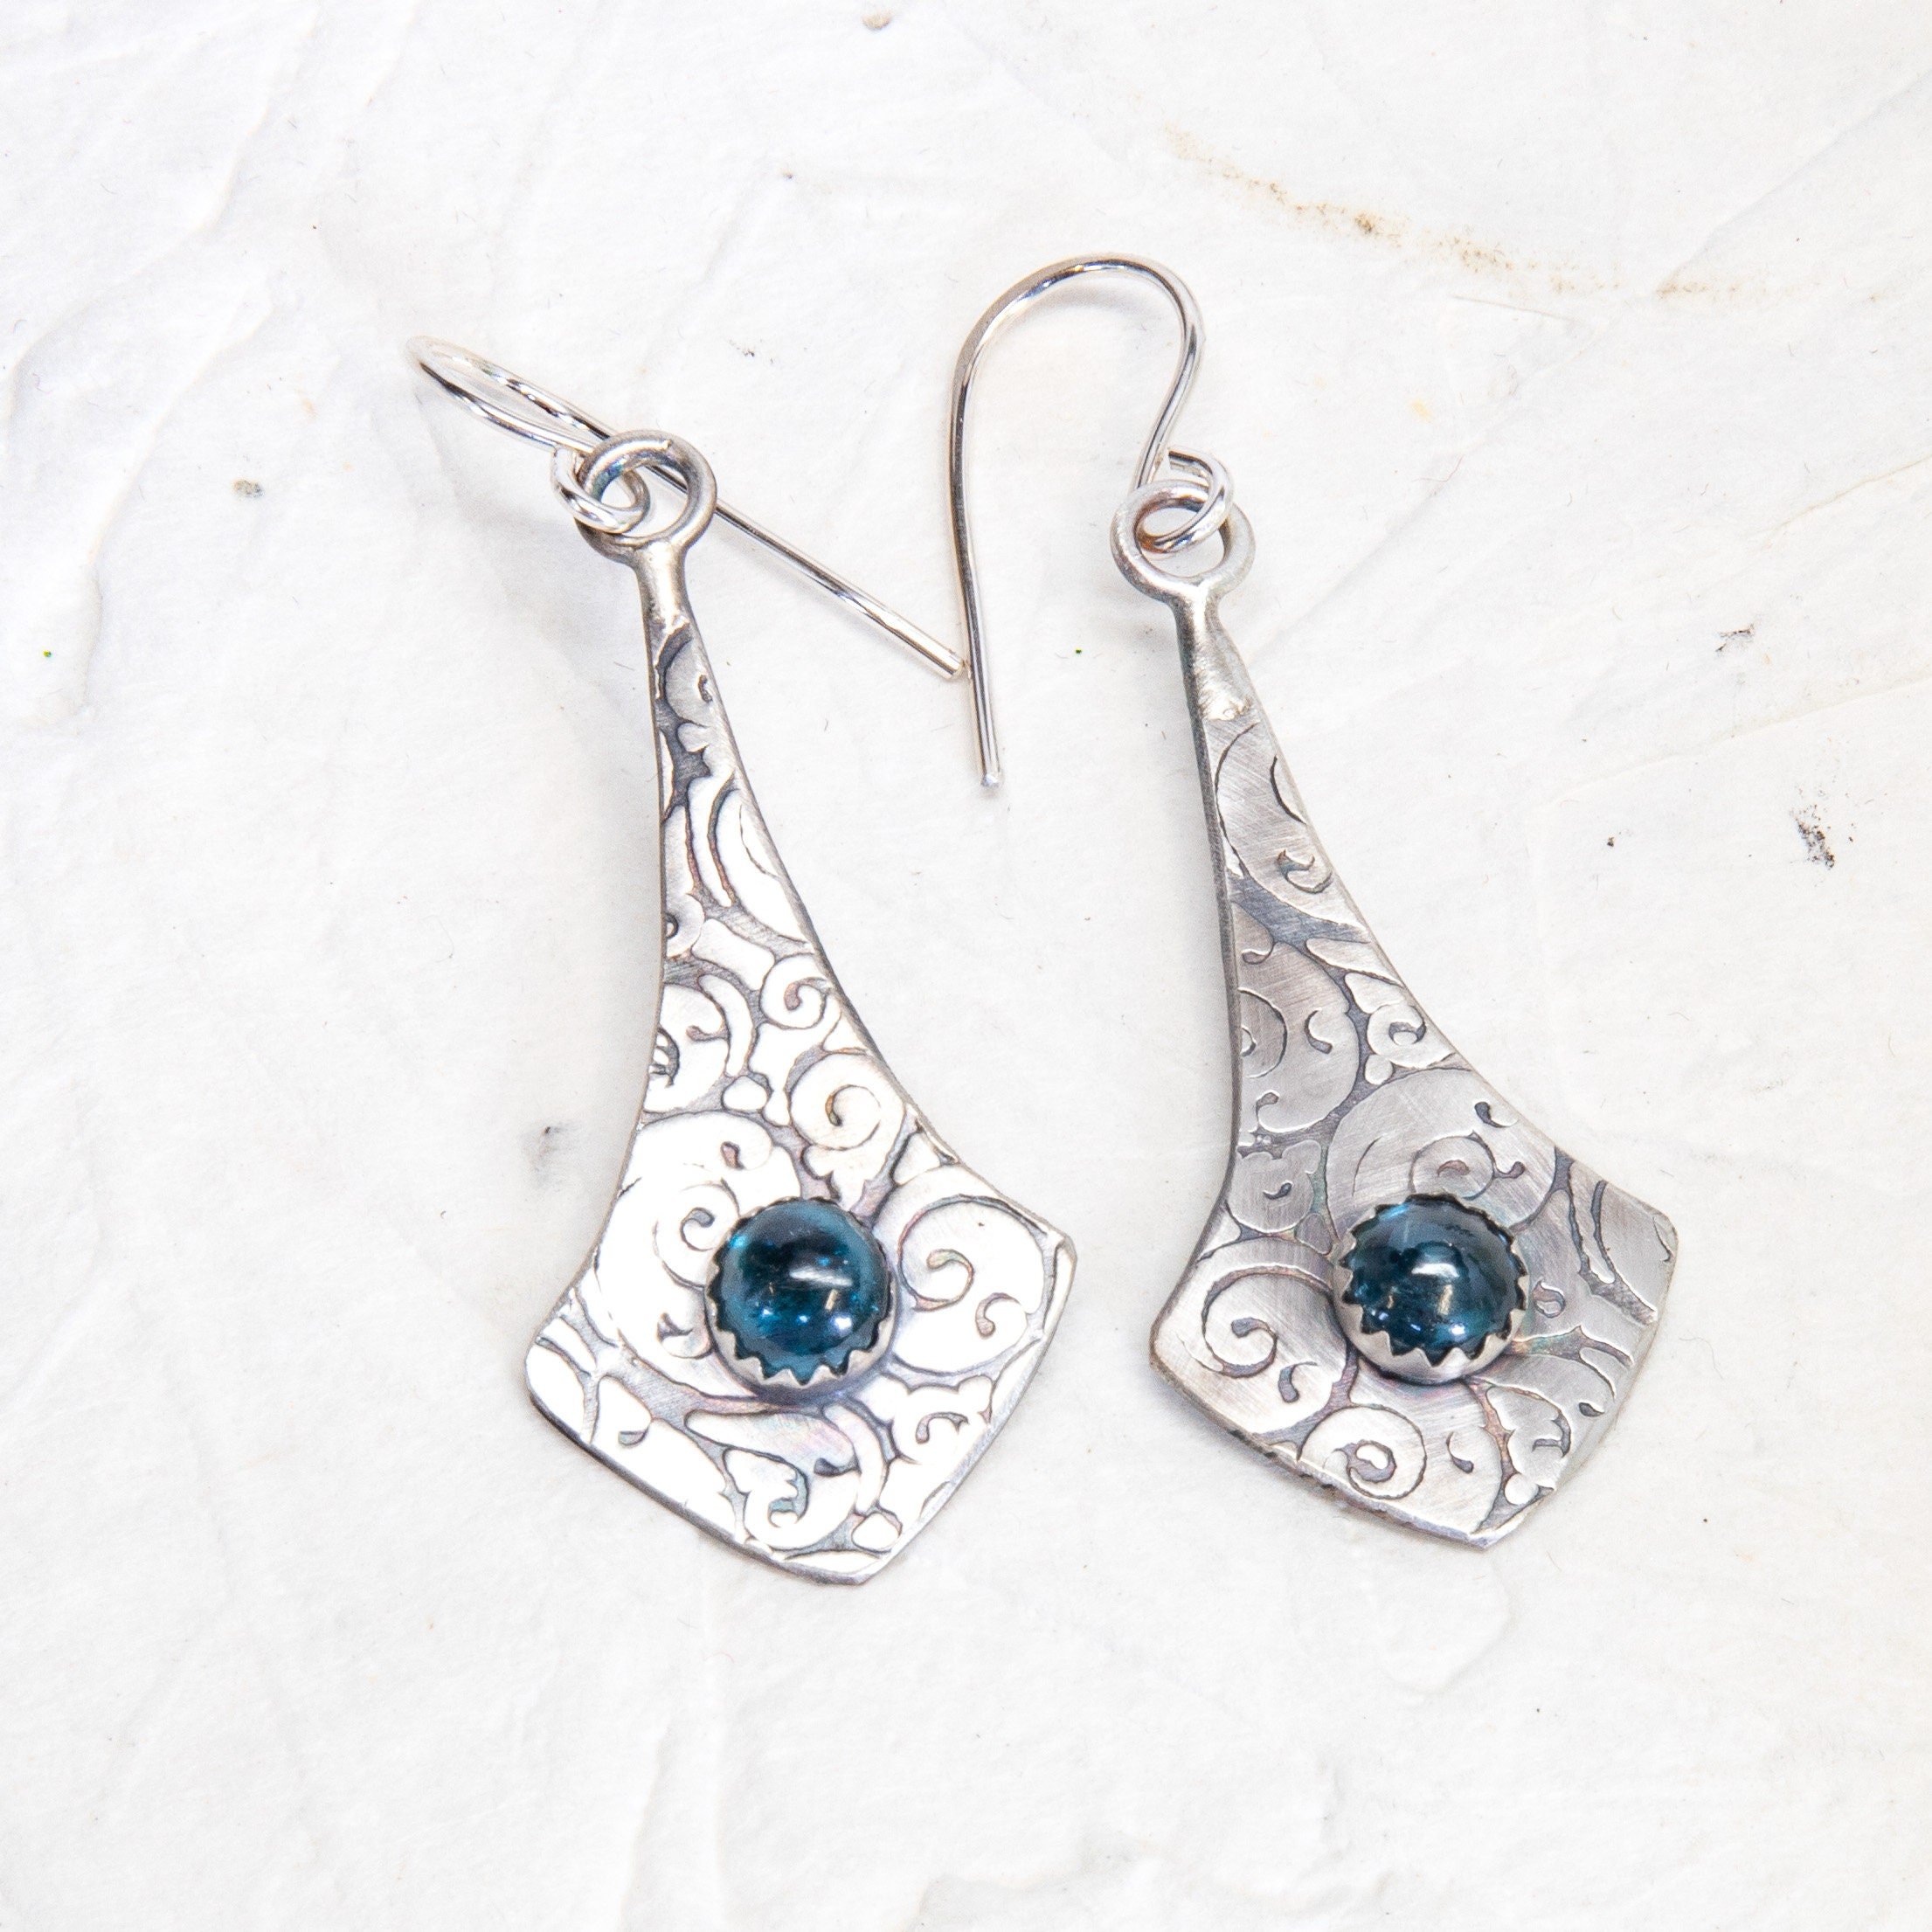 Buy Hammered Texture Sterling Silver Drop Hanging Earrings Online in India  - Etsy